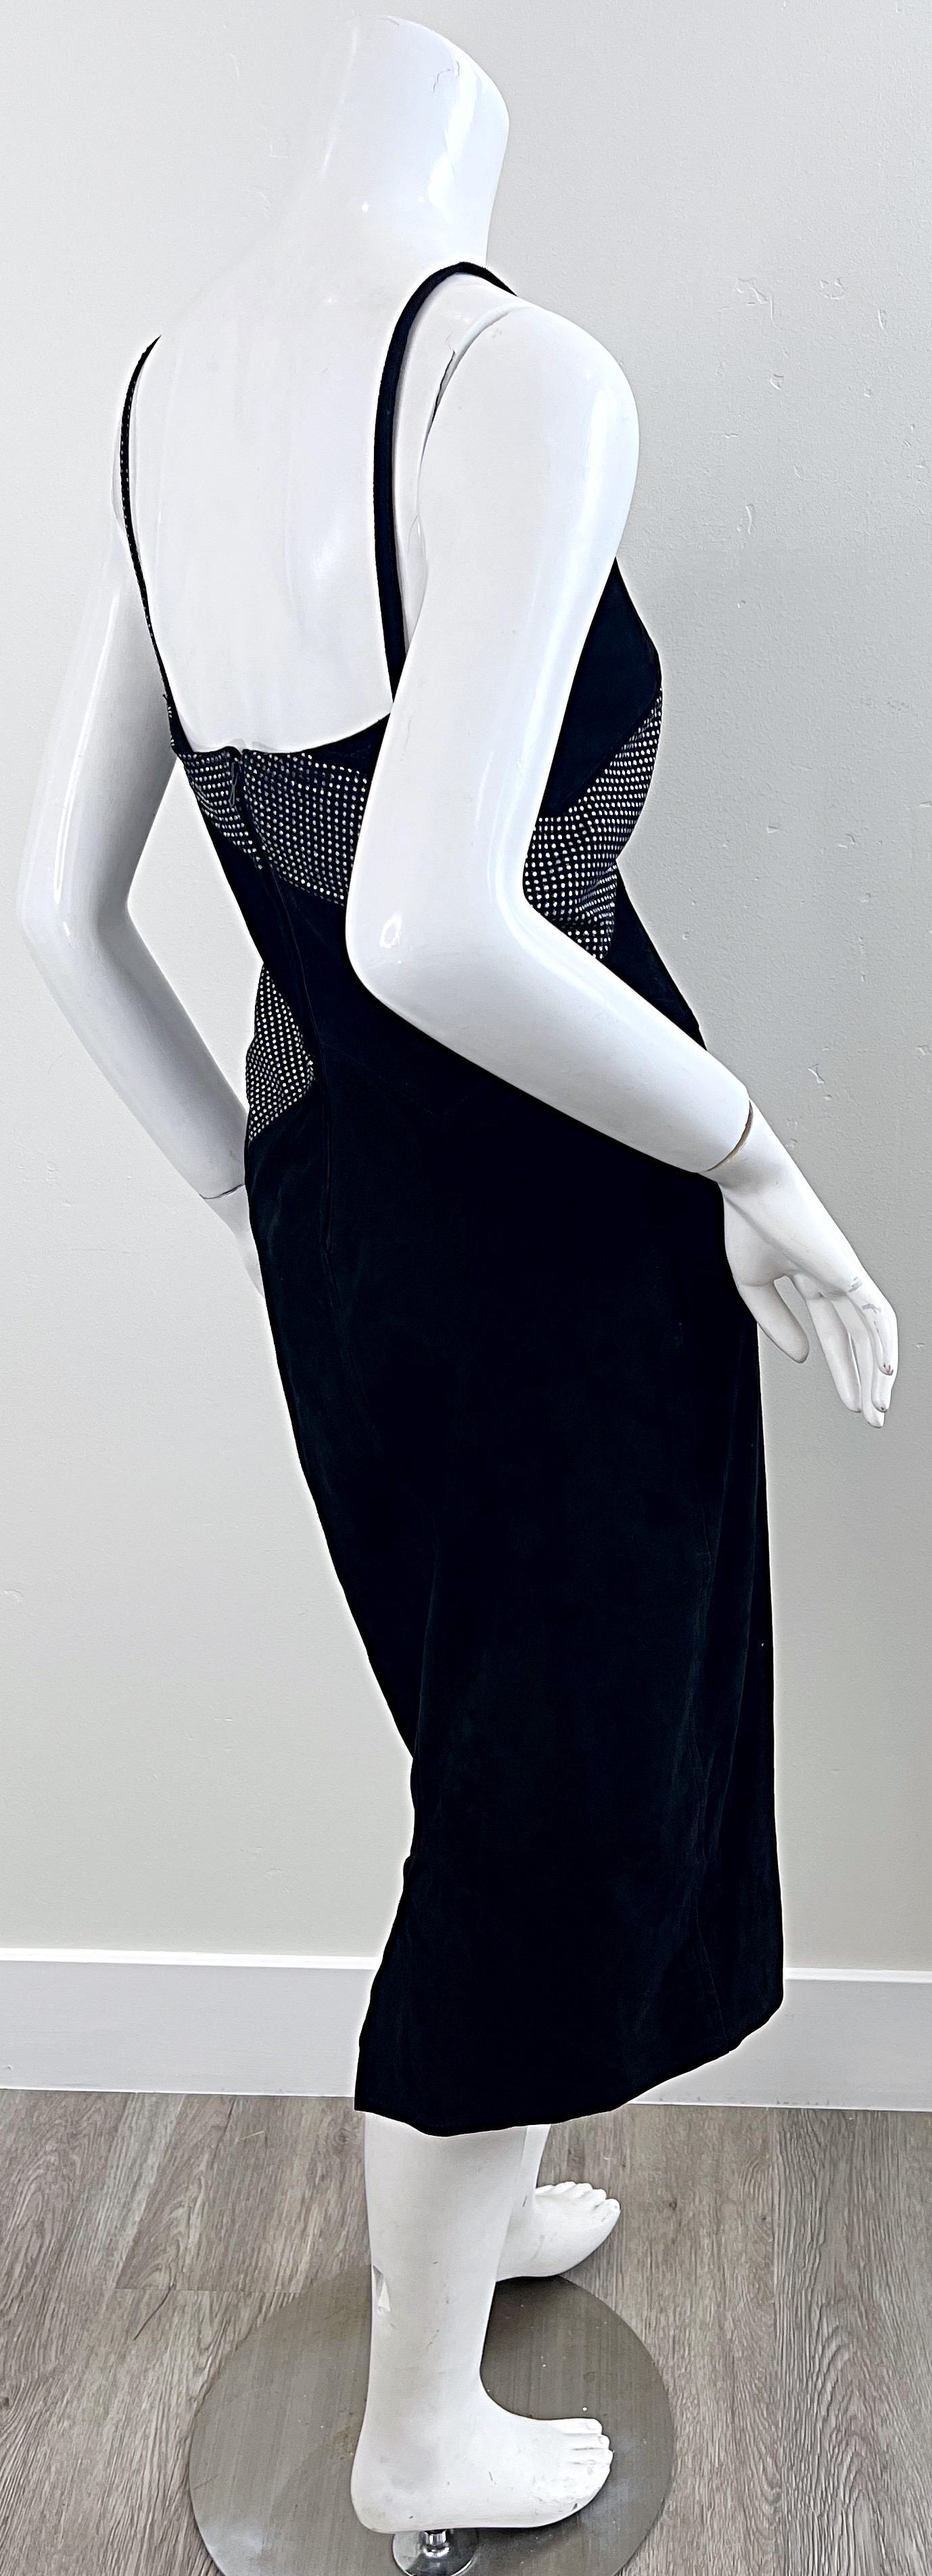 Fendi 1980s Fendissime Black Silver Suede Leather Vintage 80s Hand Painted Dress For Sale 9